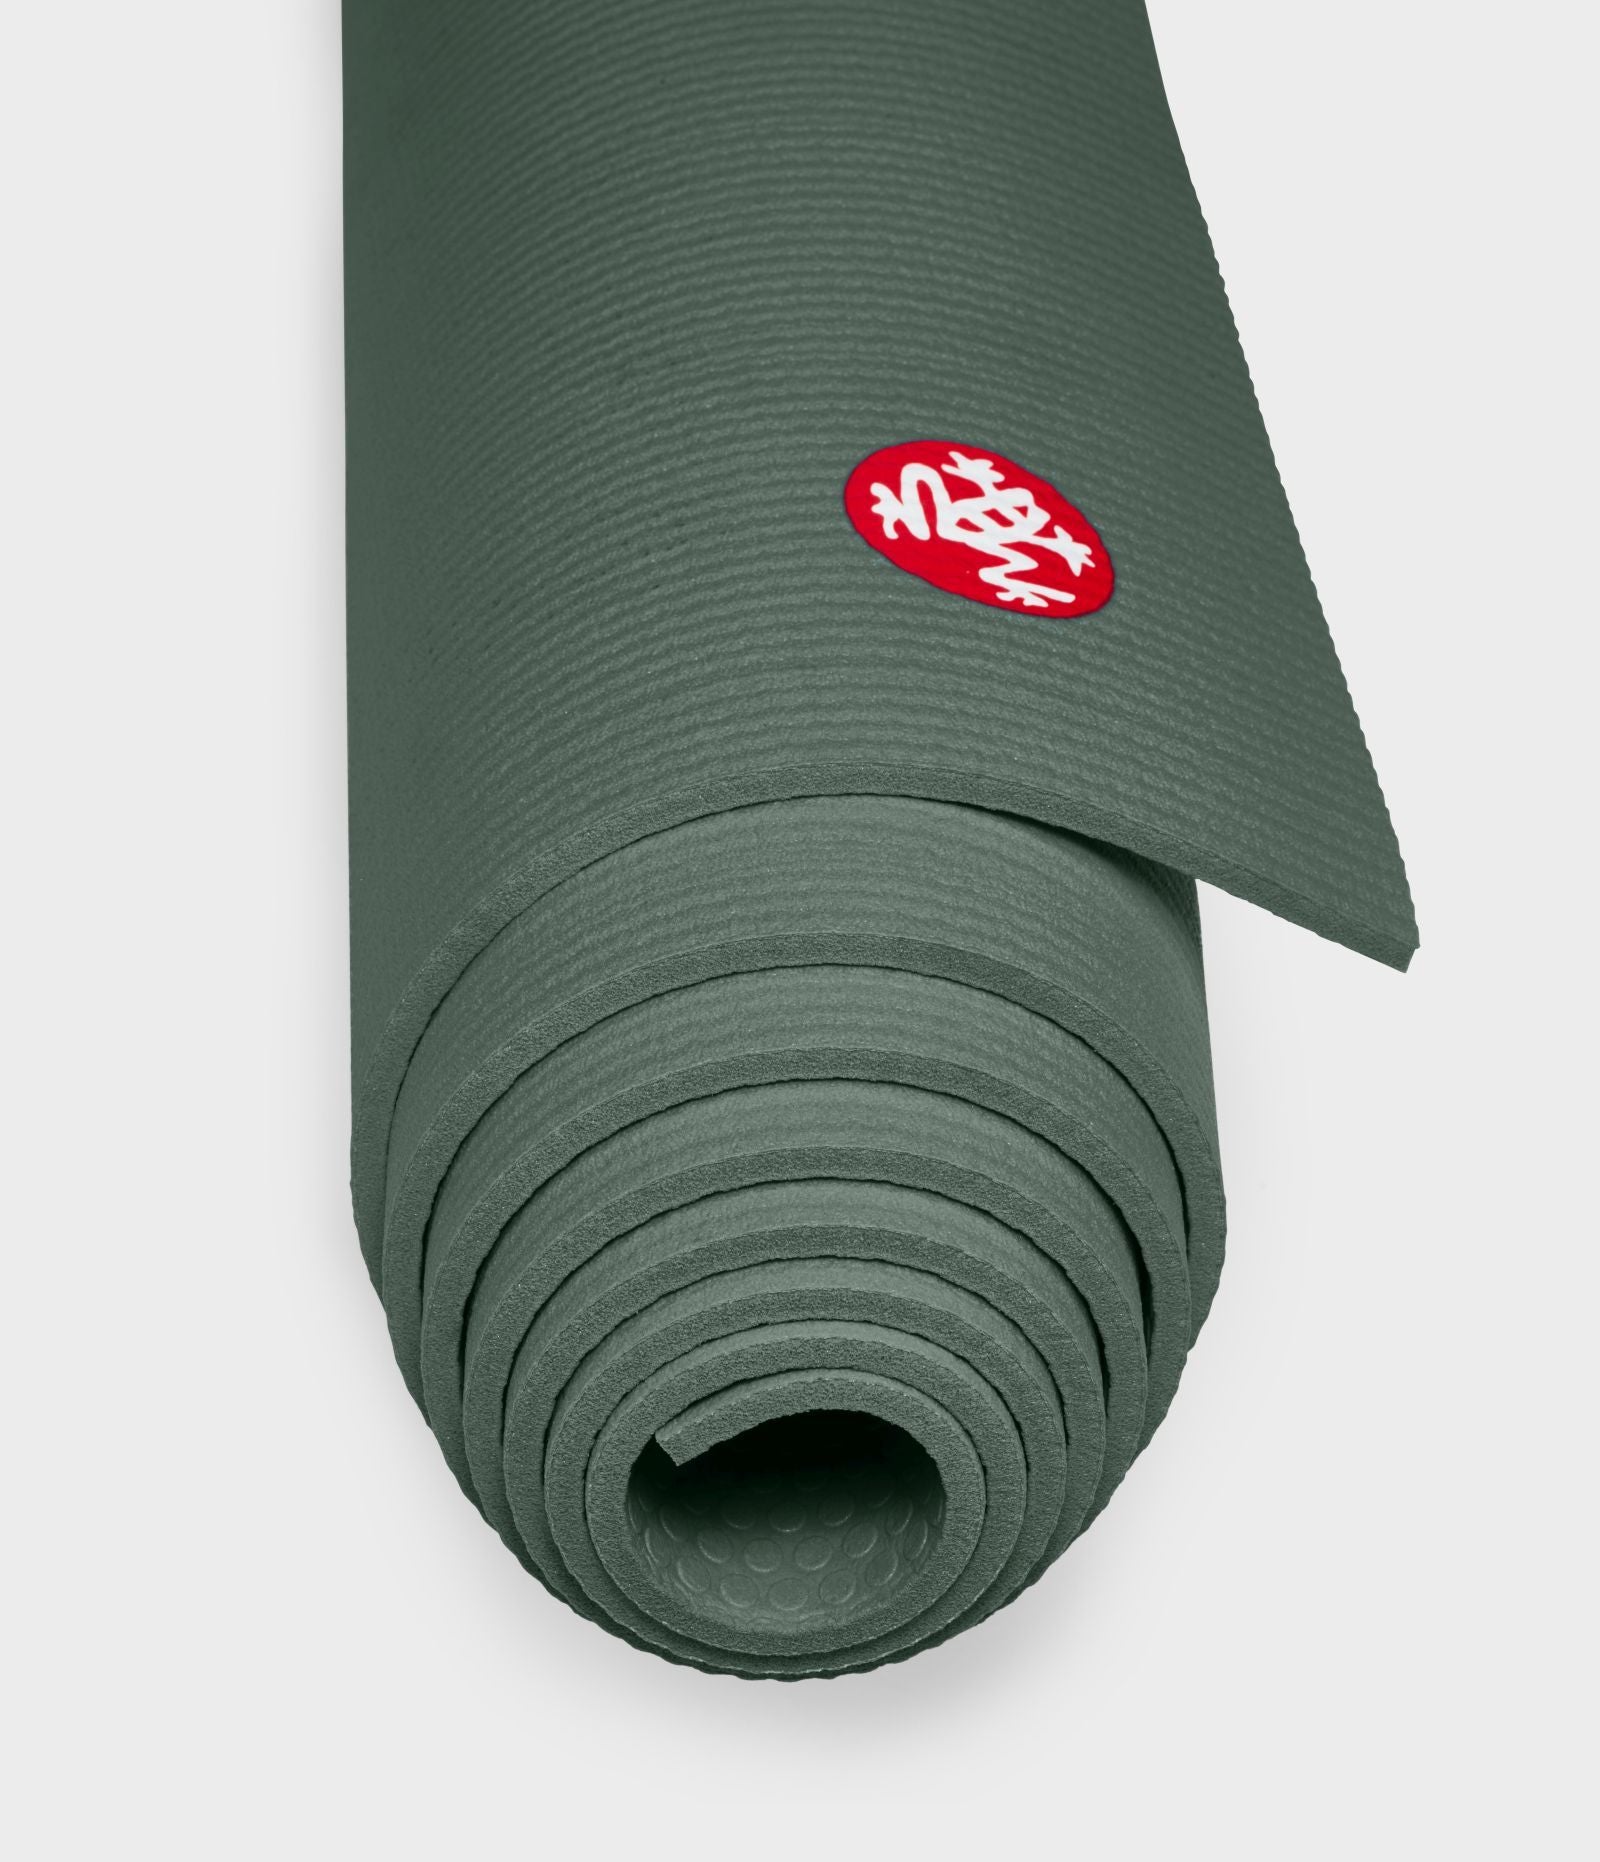 UMINEUX Yoga Mat Extra Thick 1/3'' Non 72x24x1/3, Vibrant Green